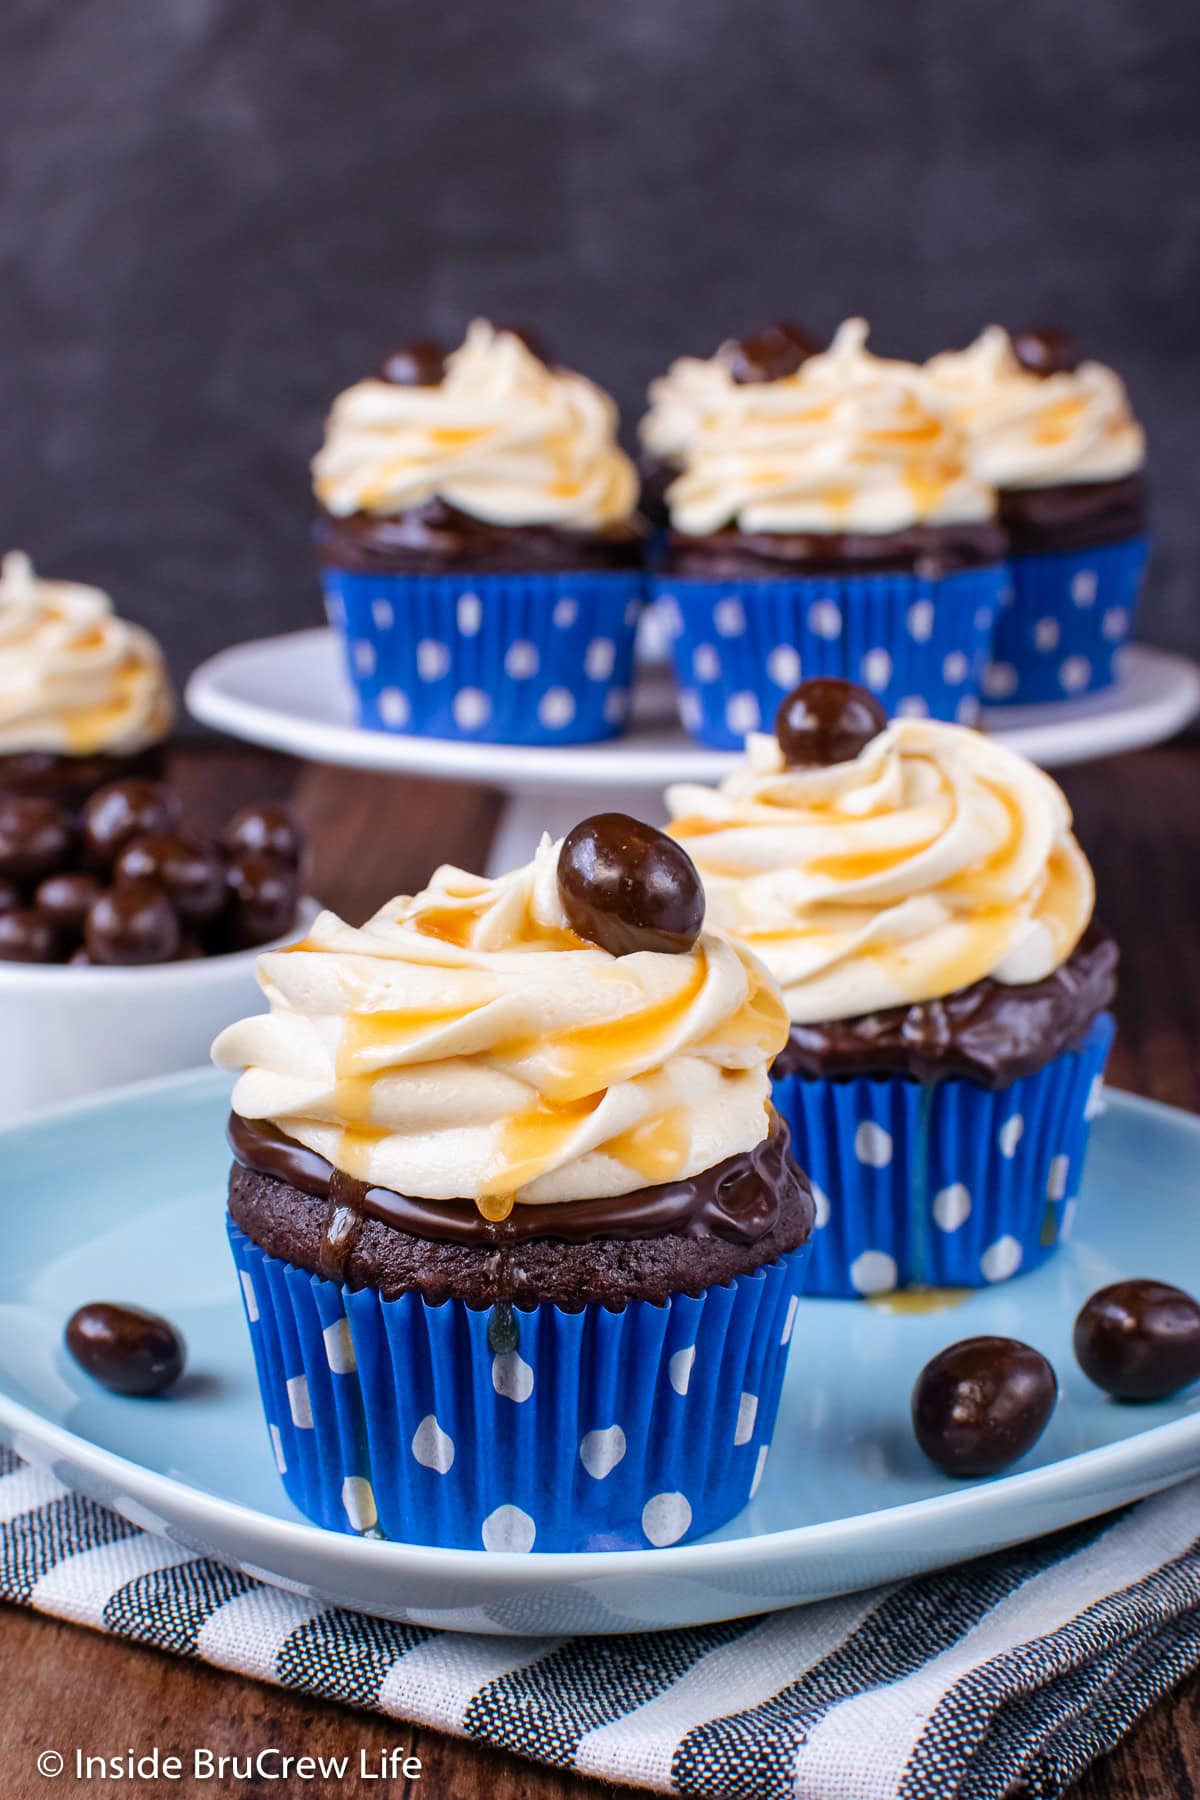 Chocolate cupcakes in blue wrappers on a blue plates.